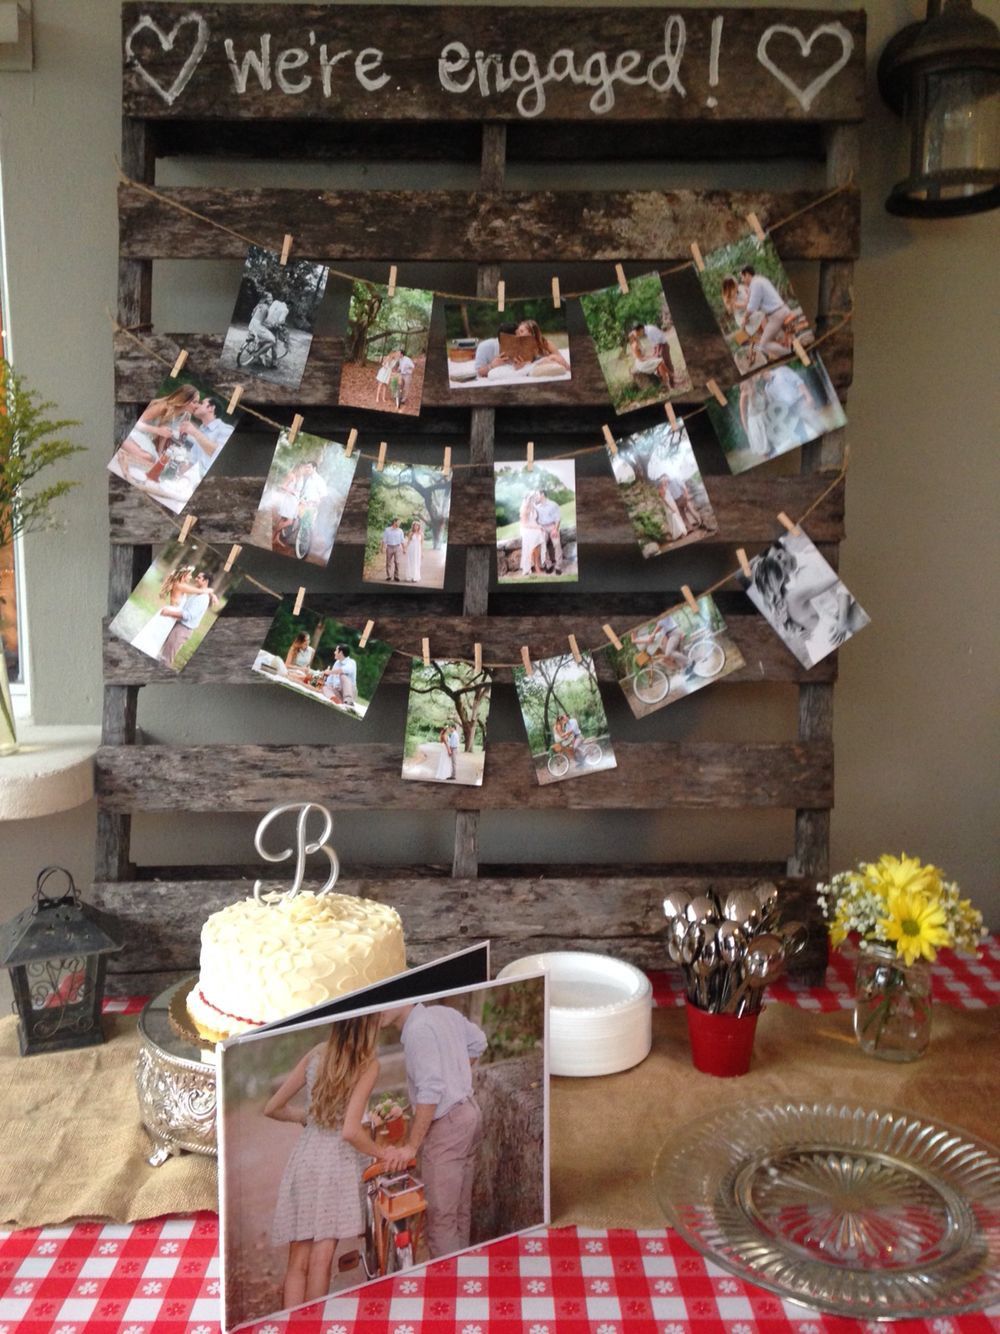 Barbecue Engagement Party Ideas
 I do BBQ …